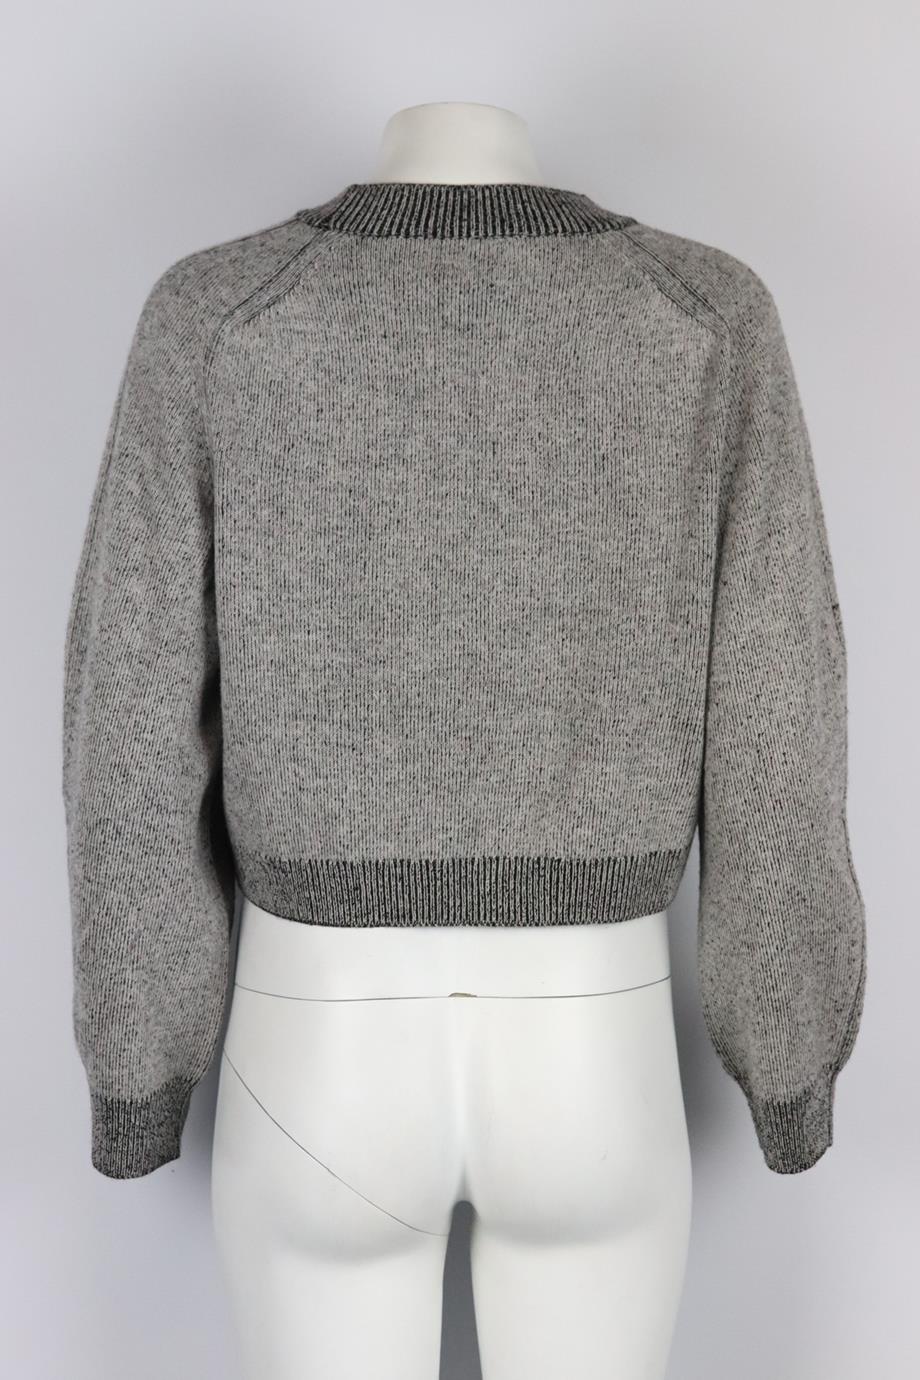 JOHN ELLIOTT CROPPED WOOL AND CASHMERE BLEND SWEATER SMALL